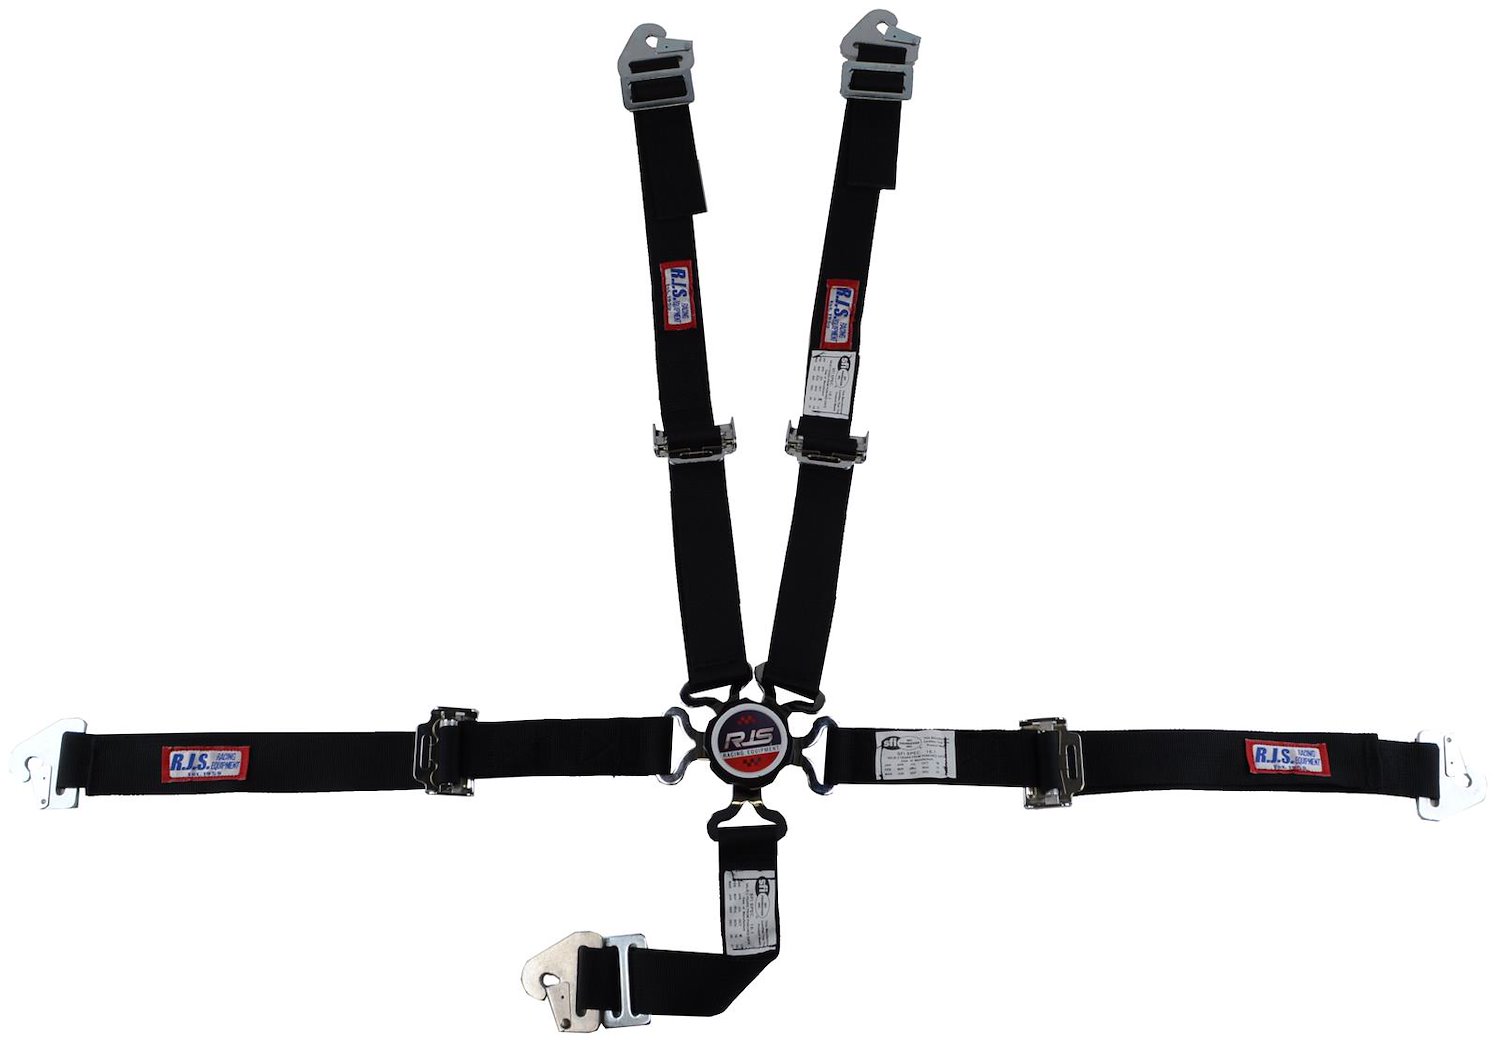 SFI 16.1 CAM-LOCK HARNESS 2 PULL UP Lap Belt 2 Shoulder Harness V ROLL BAR Mount 2 DOUBLE Sub ALL BOLT Ends GRAY